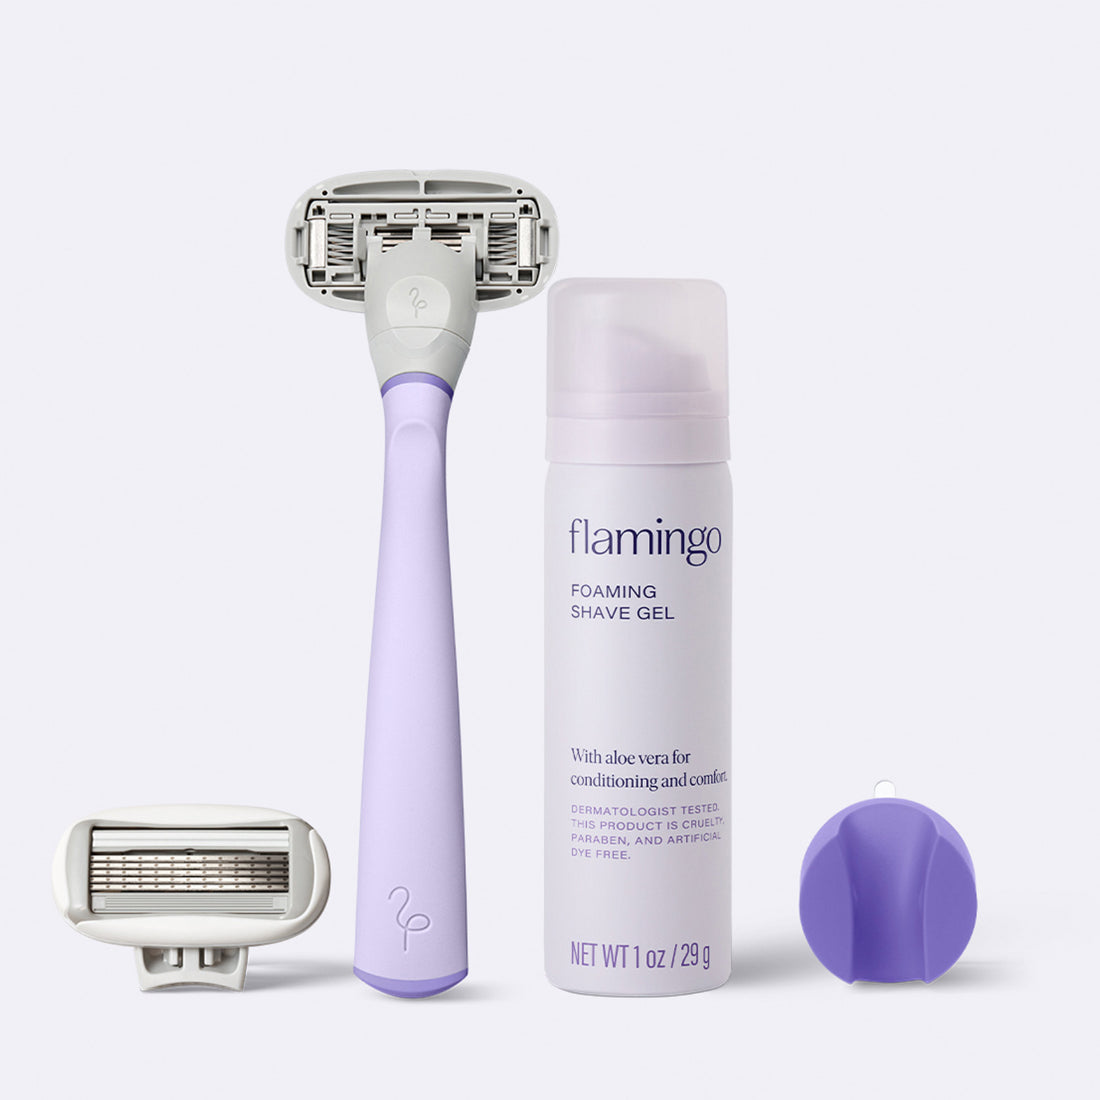 Flamingo Starter Set in the color Lilac, featuring a razor, shower holder, extra blade, and mini 1oz foaming shave gel